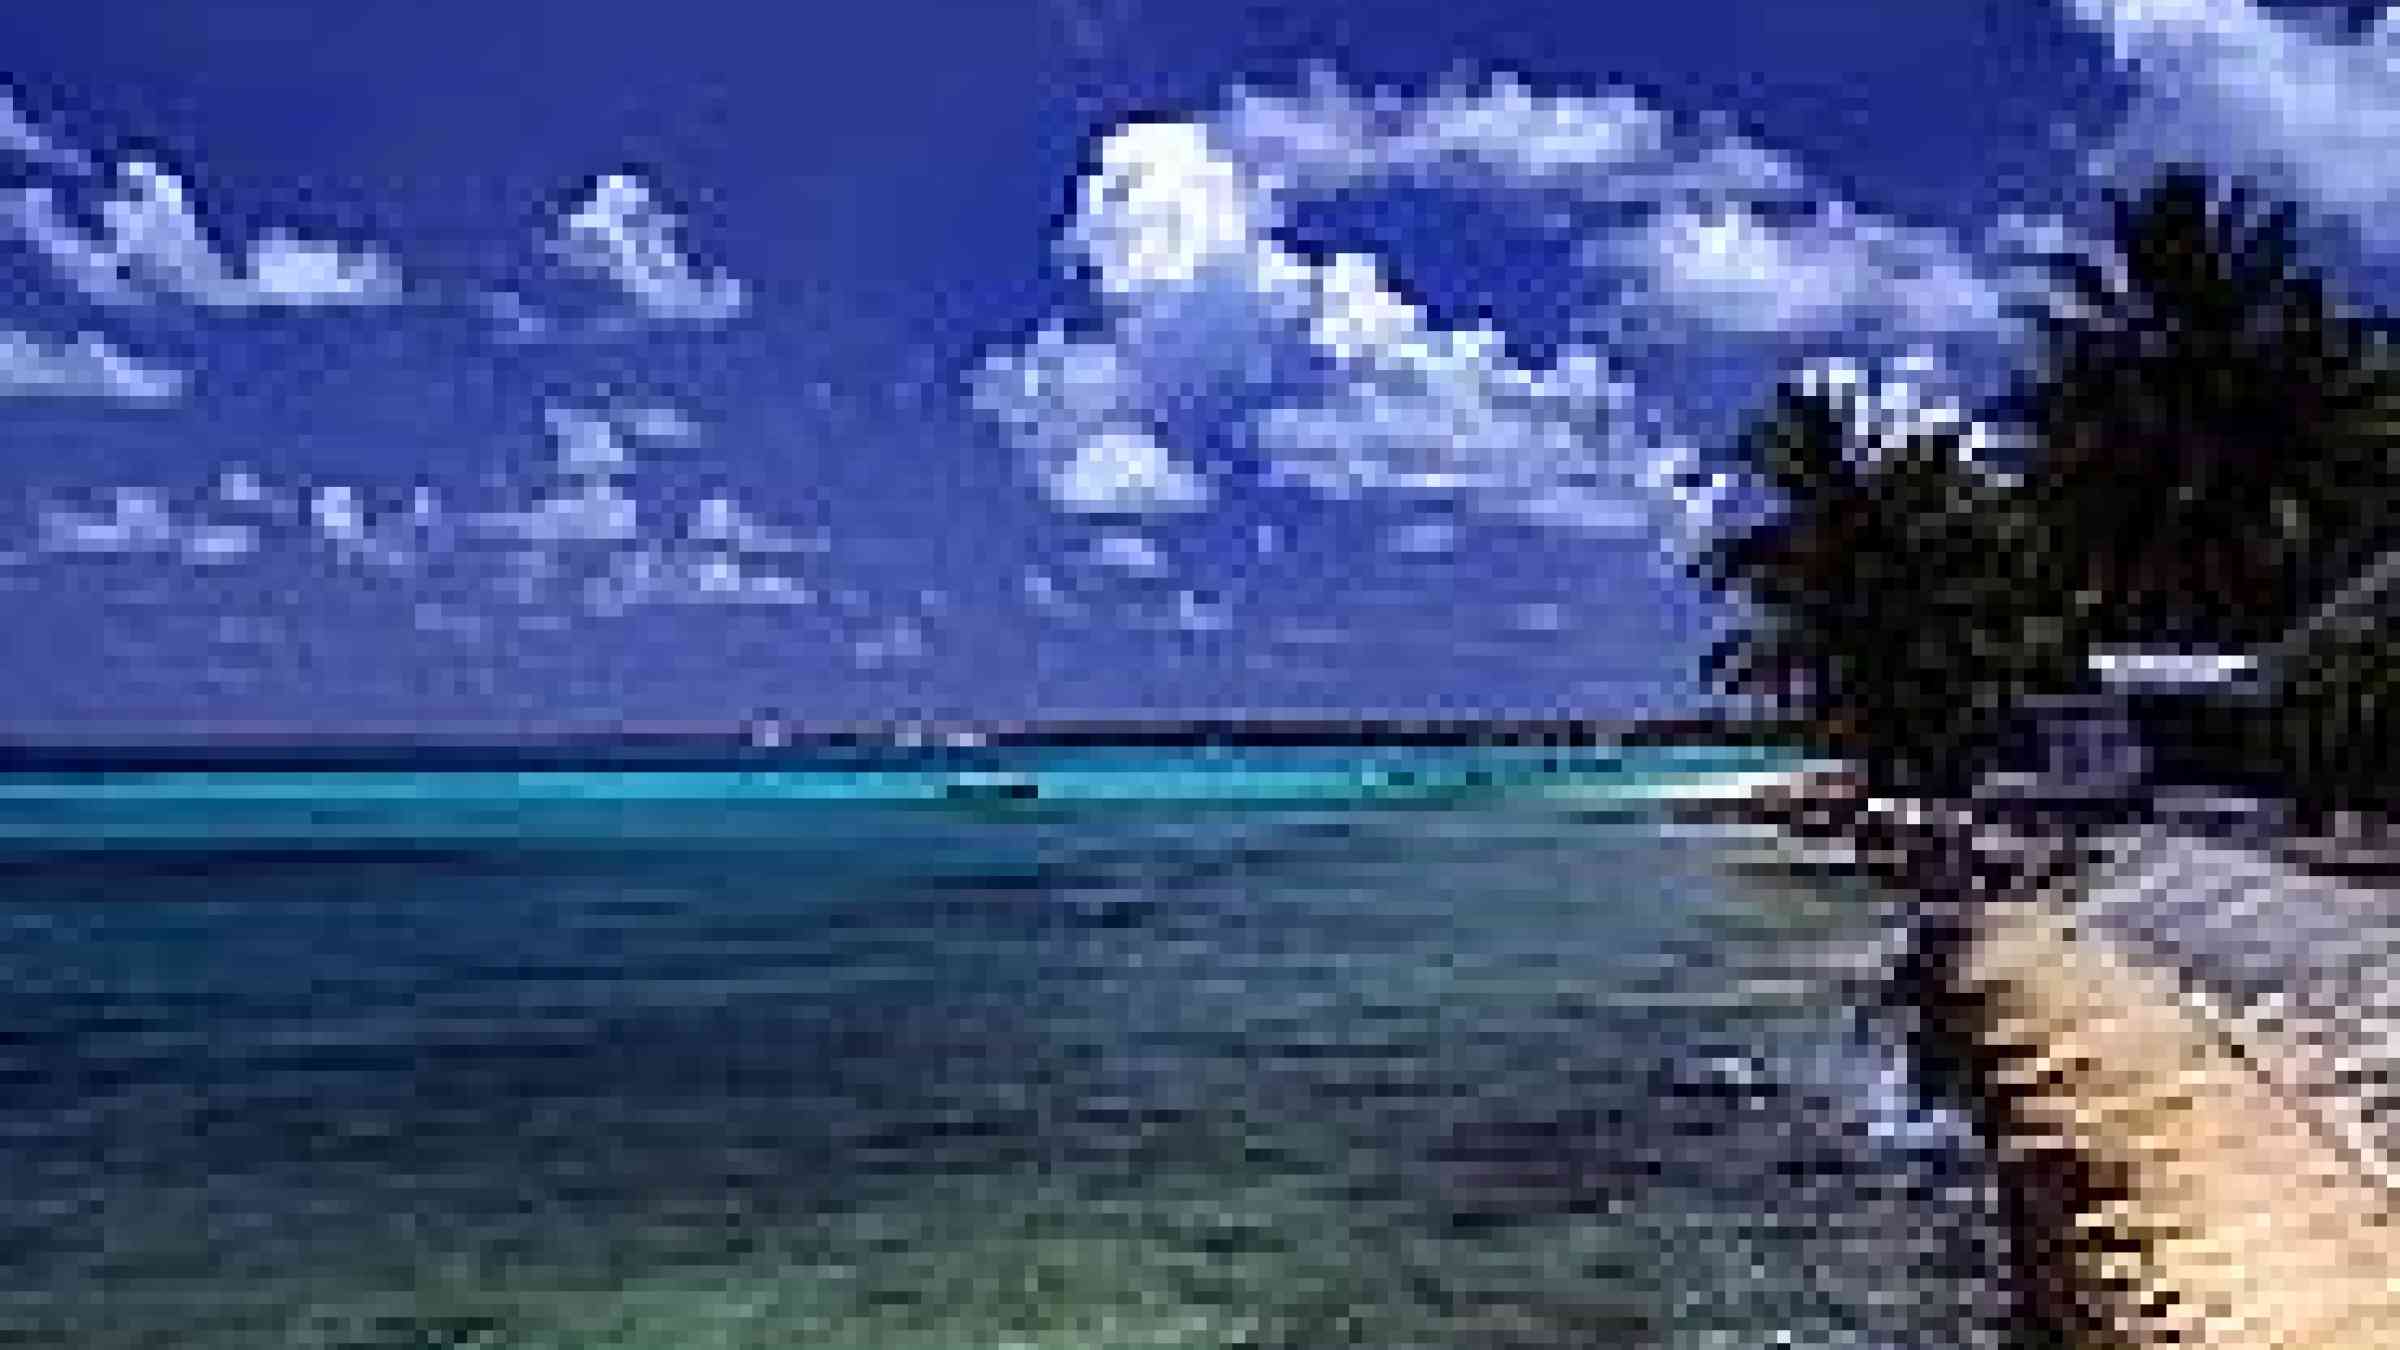 Photo of Tuvalu and the Funafuti atoll by Flikr user Mrlins, Creative Commons Attribution 2.0 Generic